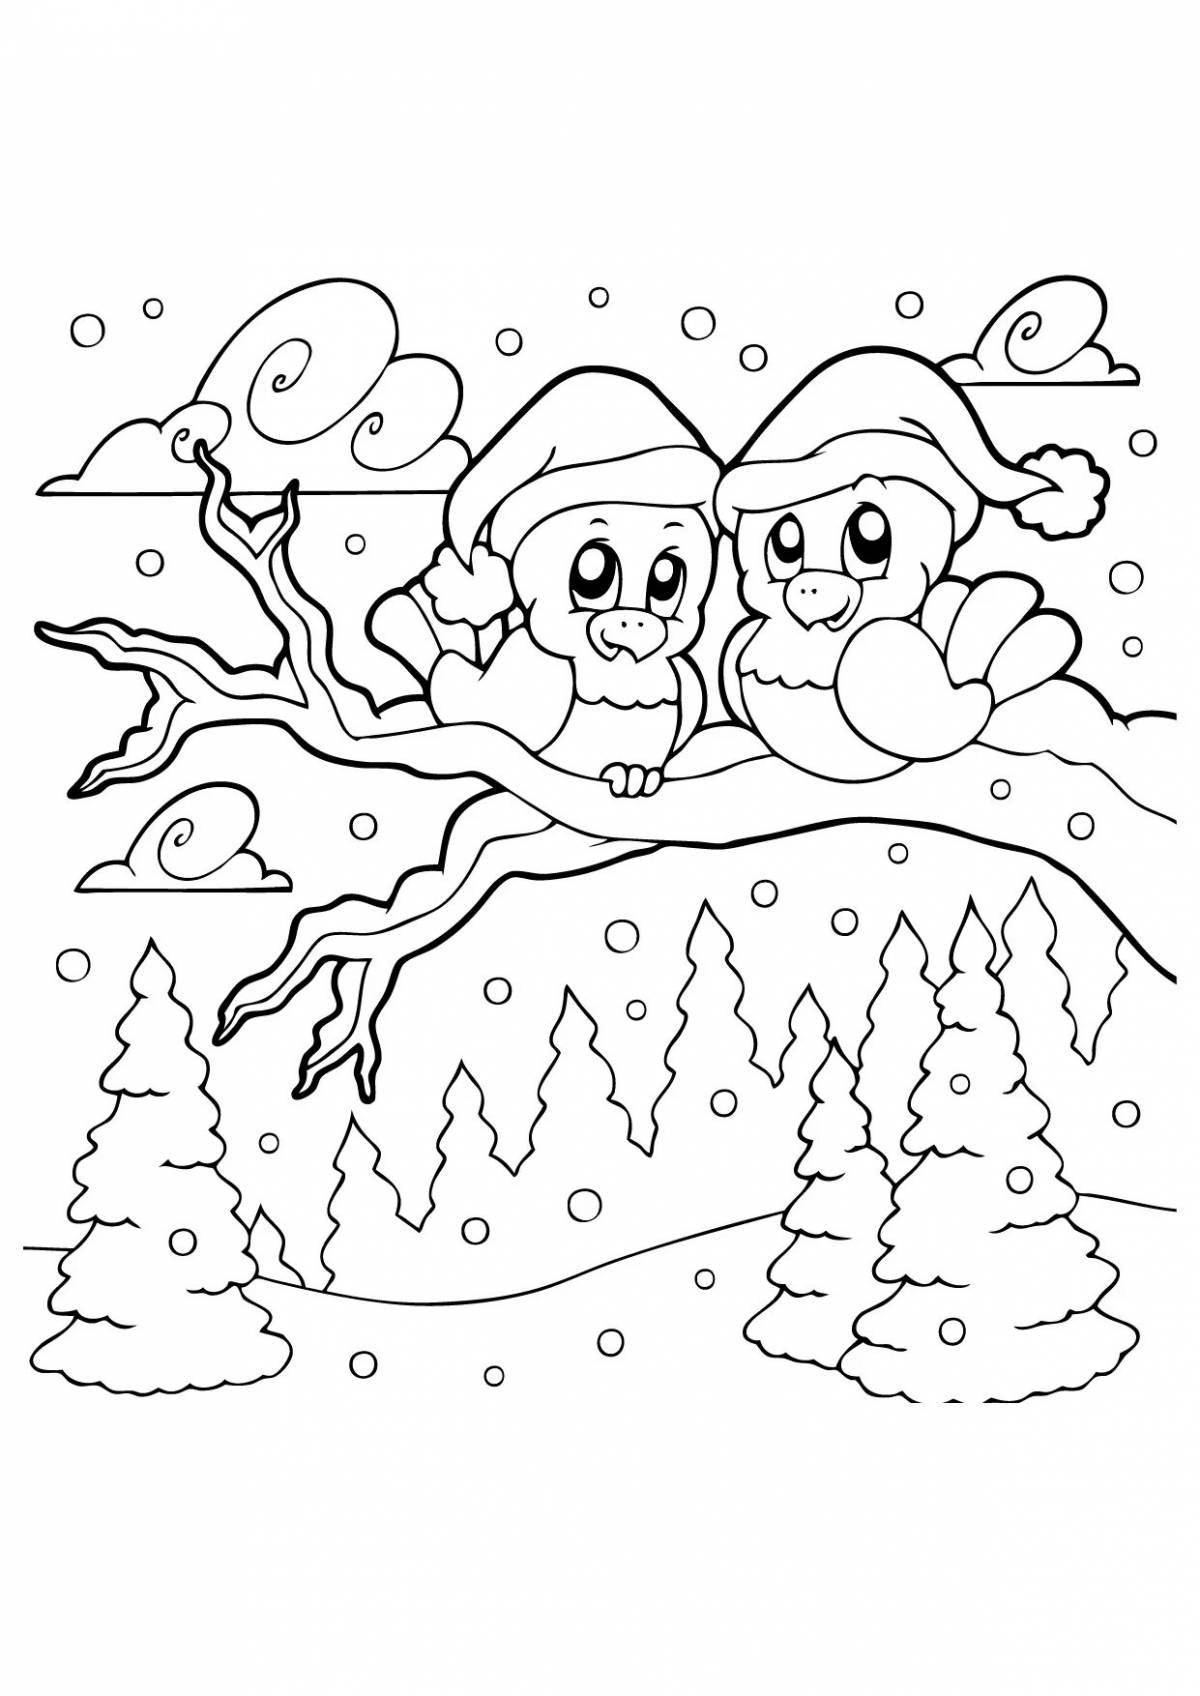 Amazing winter birds coloring book for kids 6-7 years old